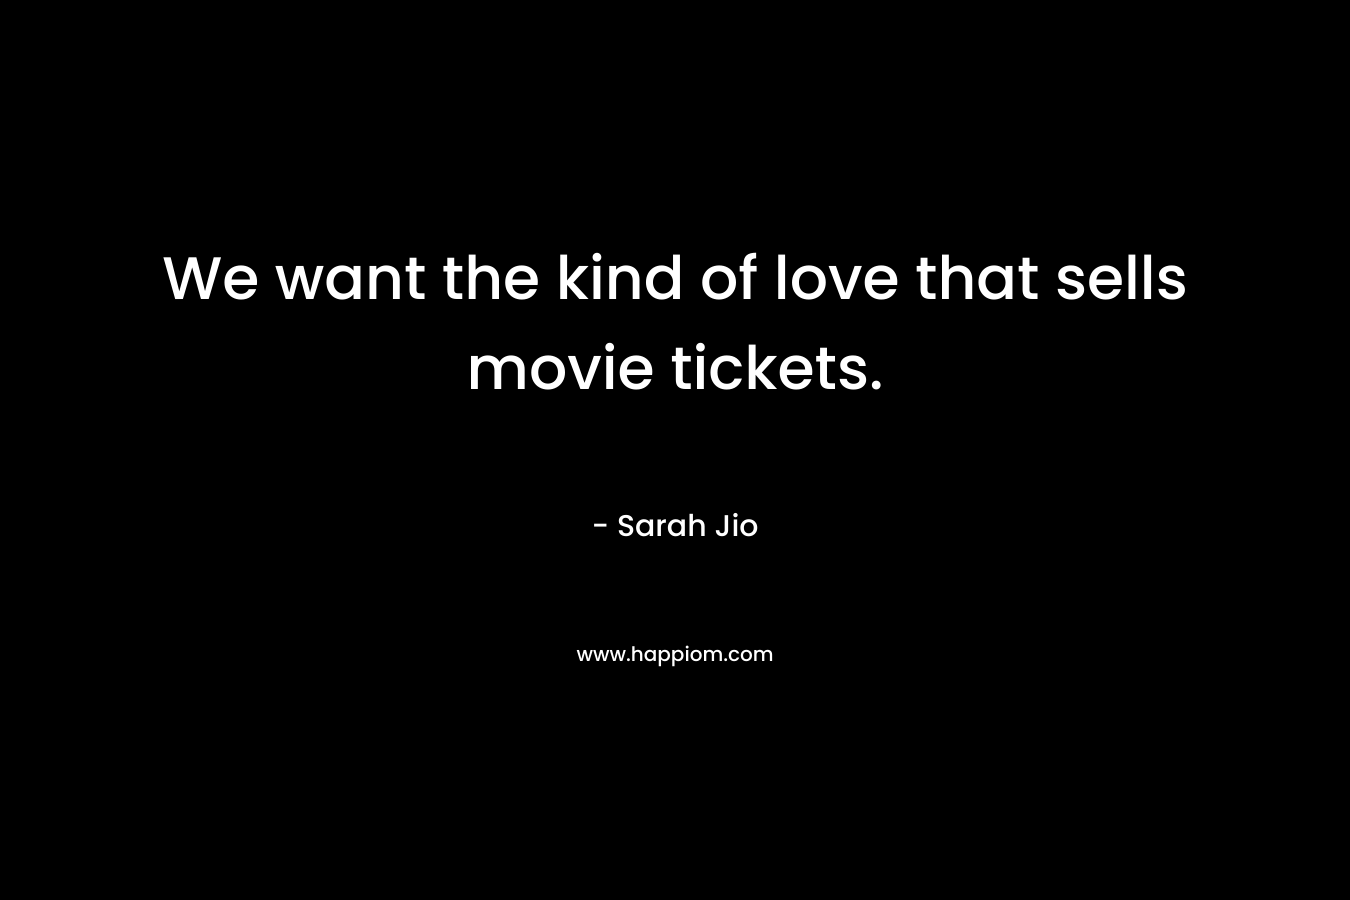 We want the kind of love that sells movie tickets. – Sarah Jio